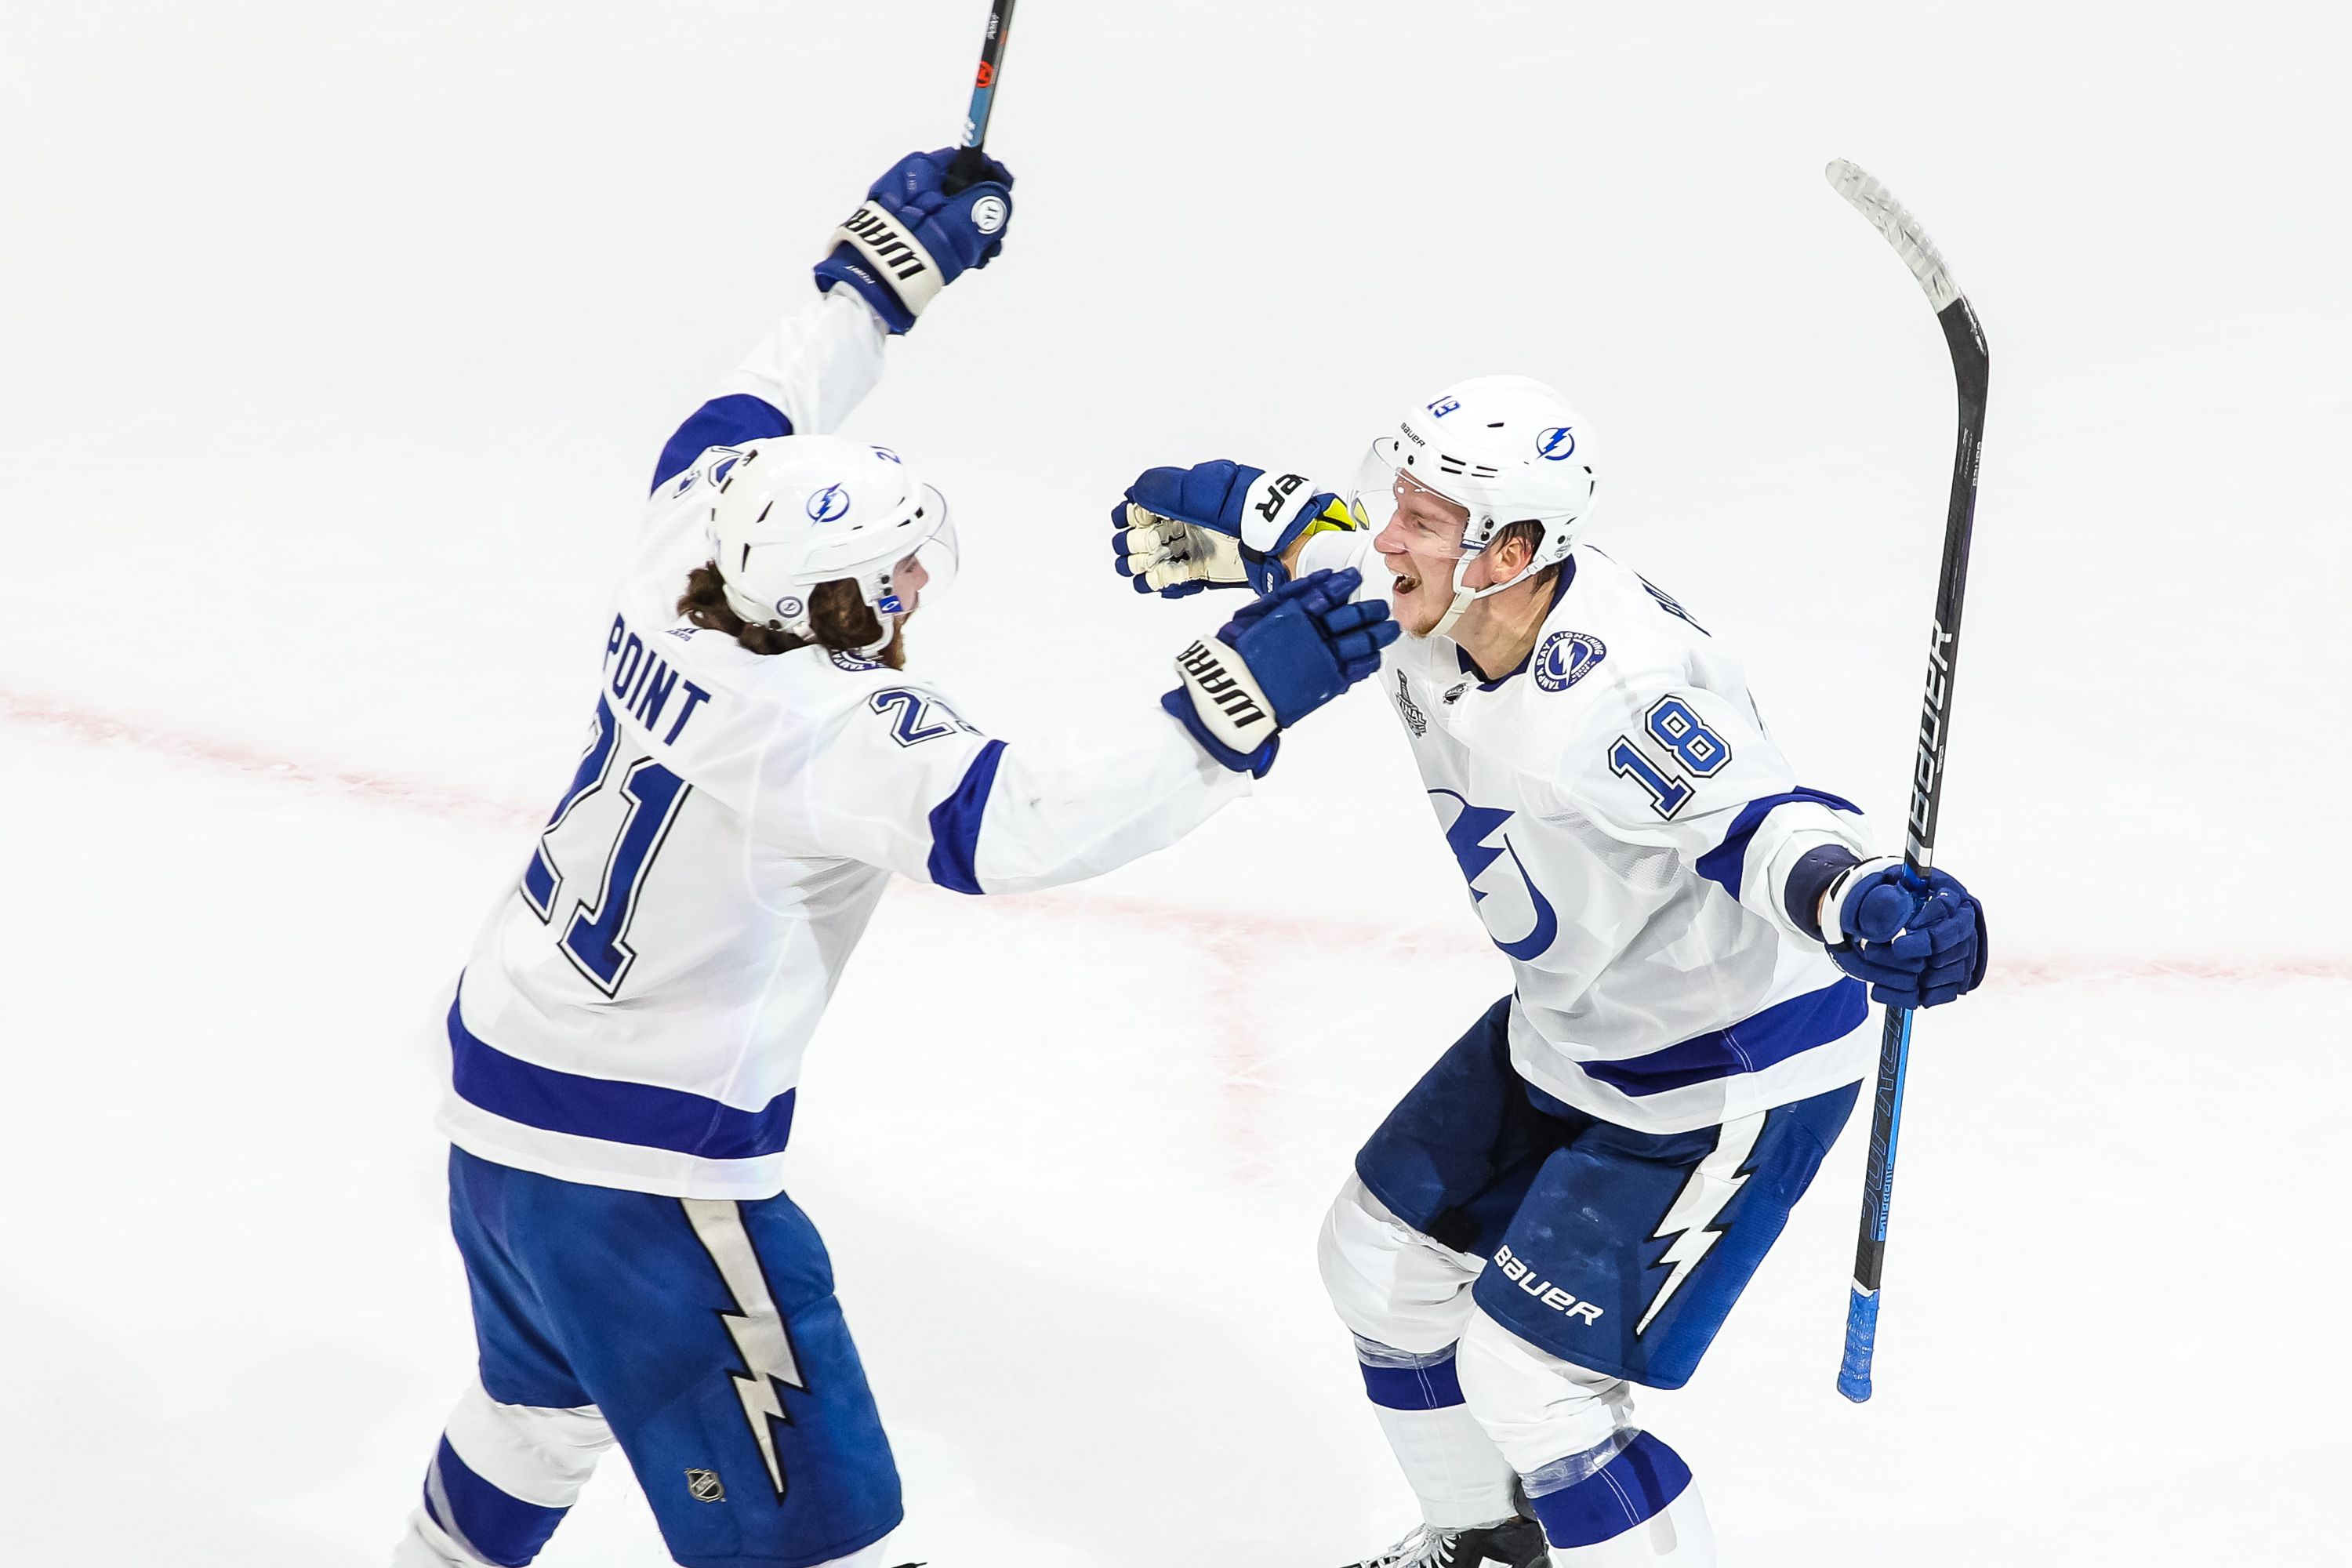 Stanley Cup ratings pop in Tampa, especially for Lightning's Game